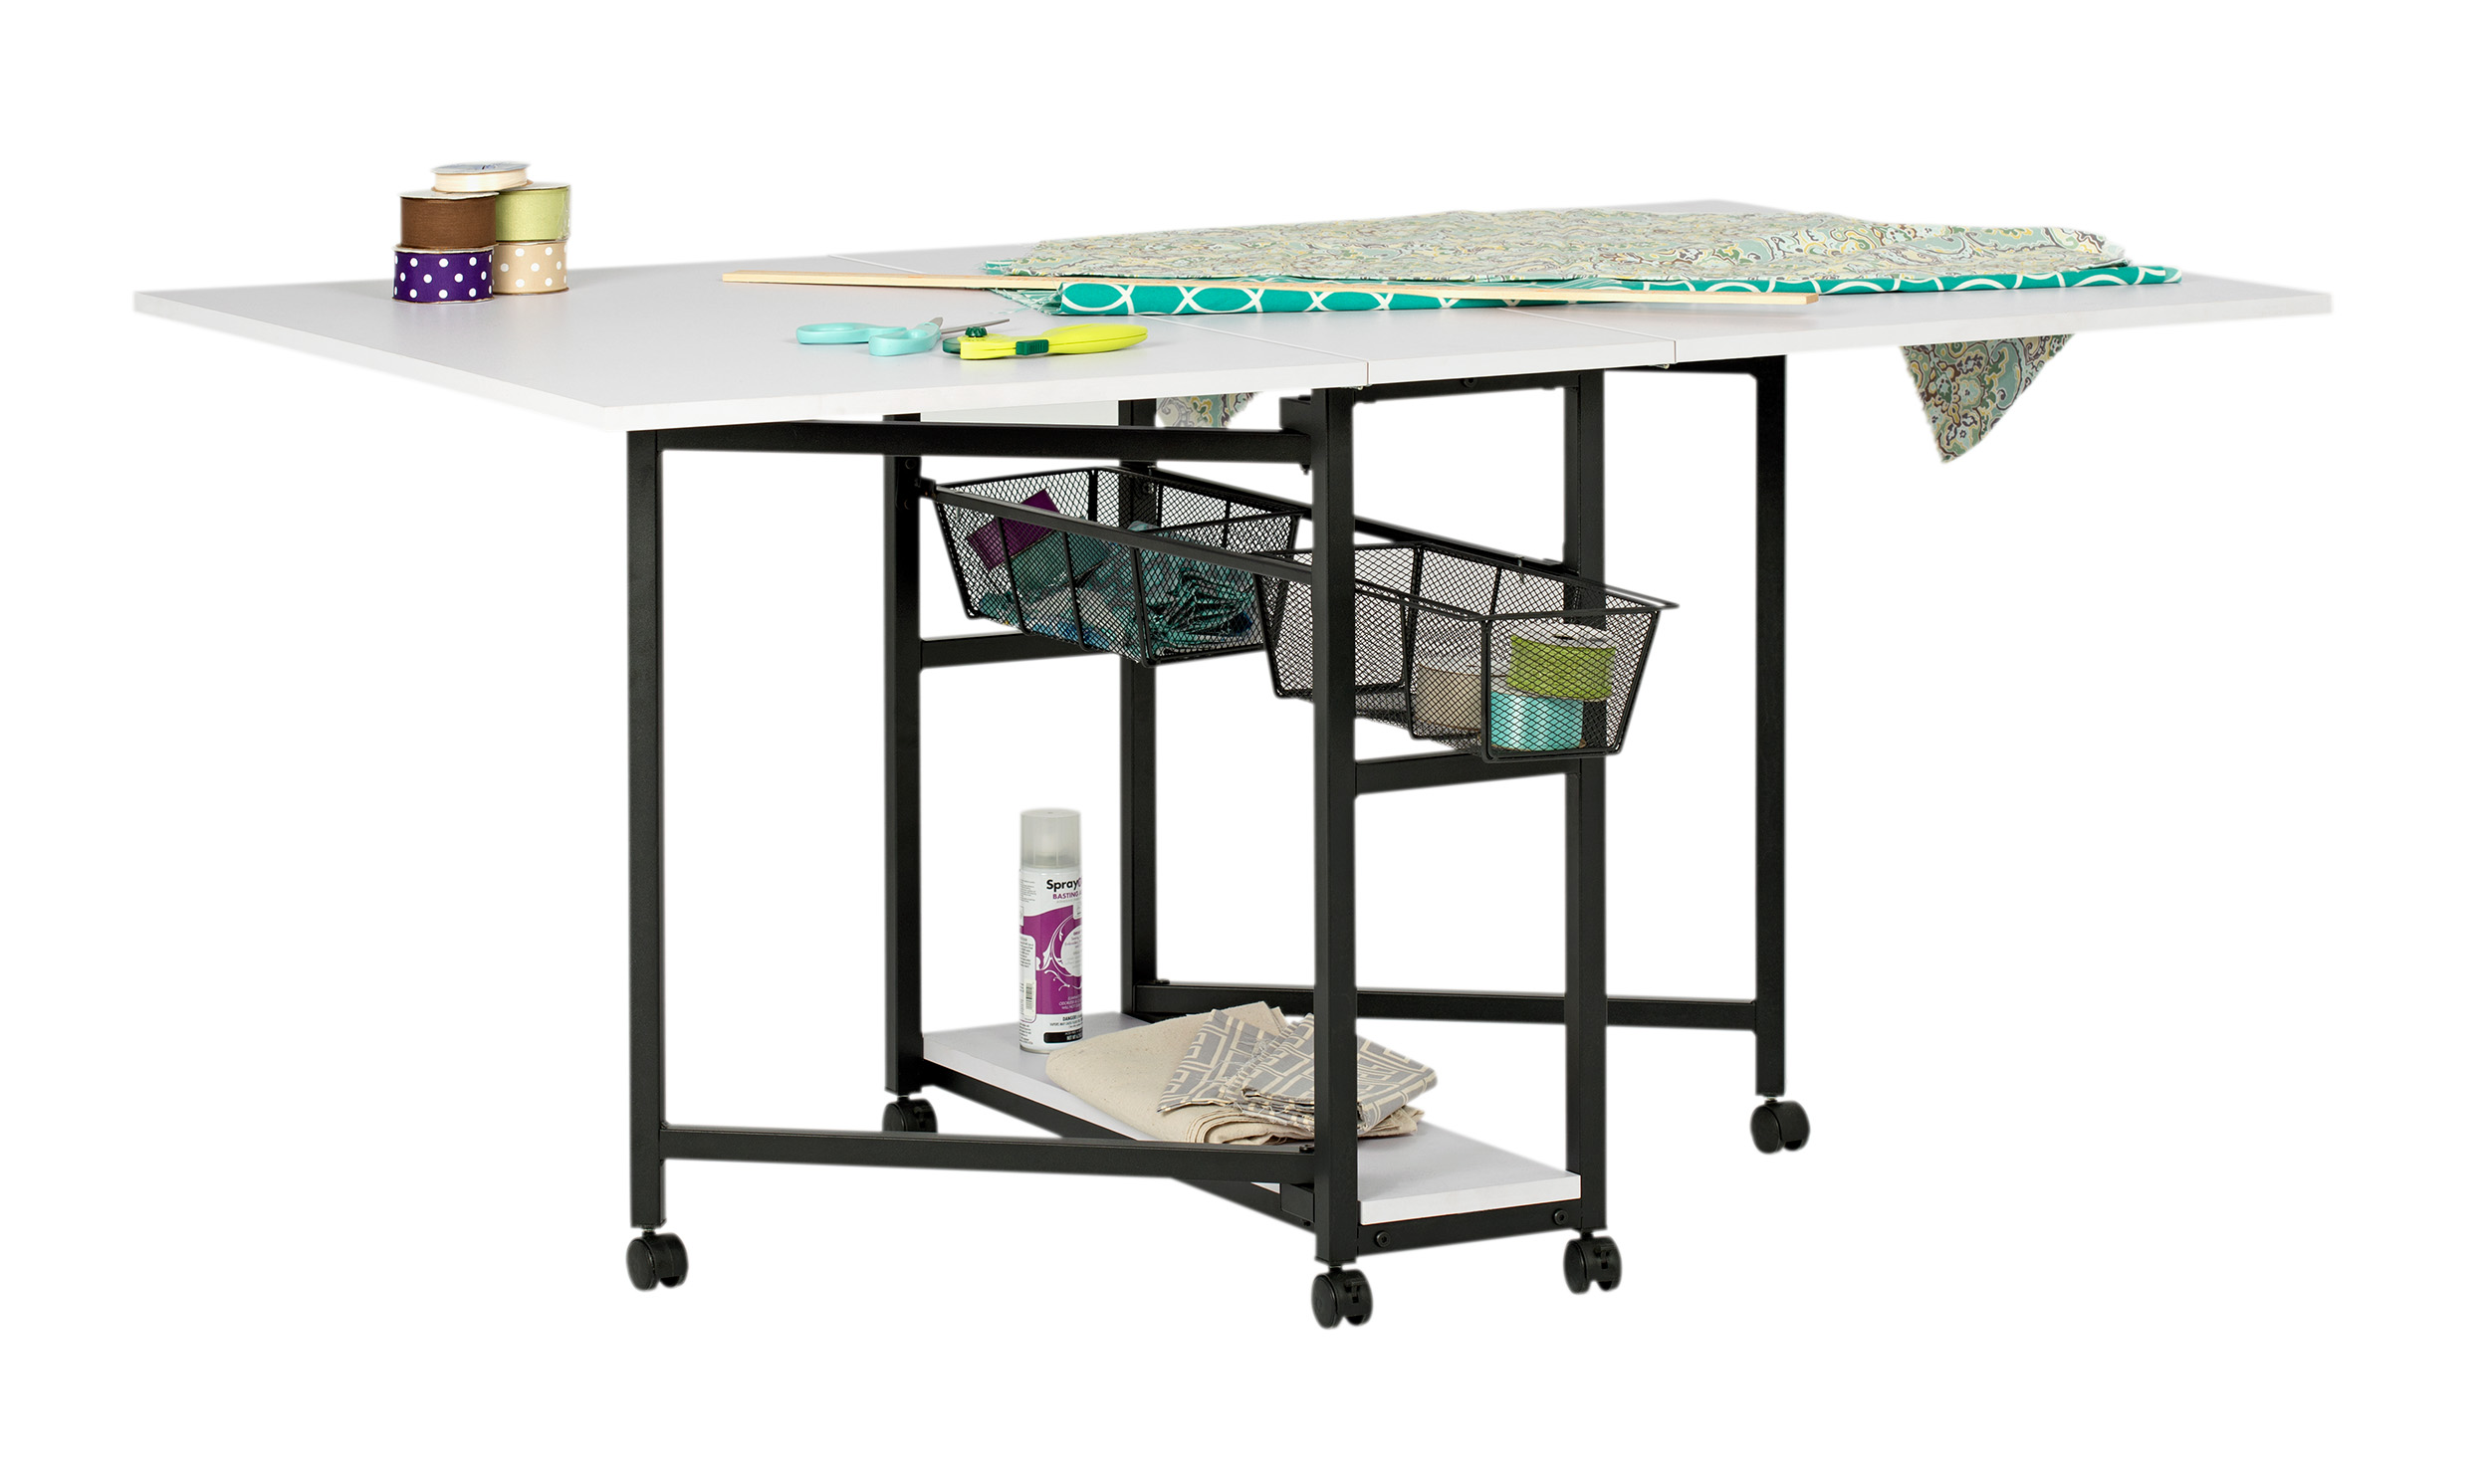 Sew Ready Mobile Fabric Cutting Table with Storage 30" H in Charcoal/White - image 1 of 11